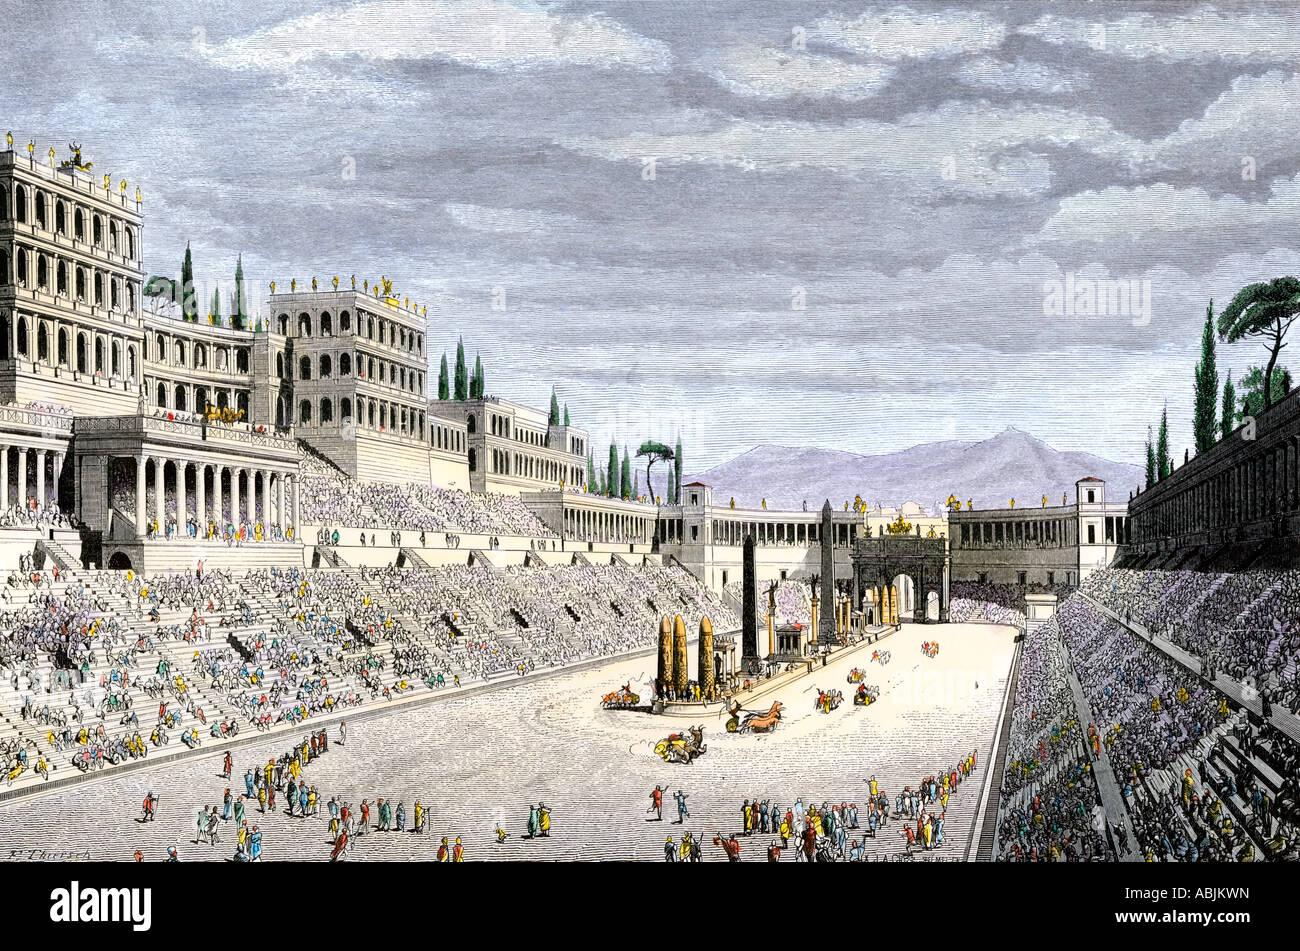 Audience cheering charioteers racing in the Circus Maximus of ancient Rome. Hand-colored woodcut Stock Photo